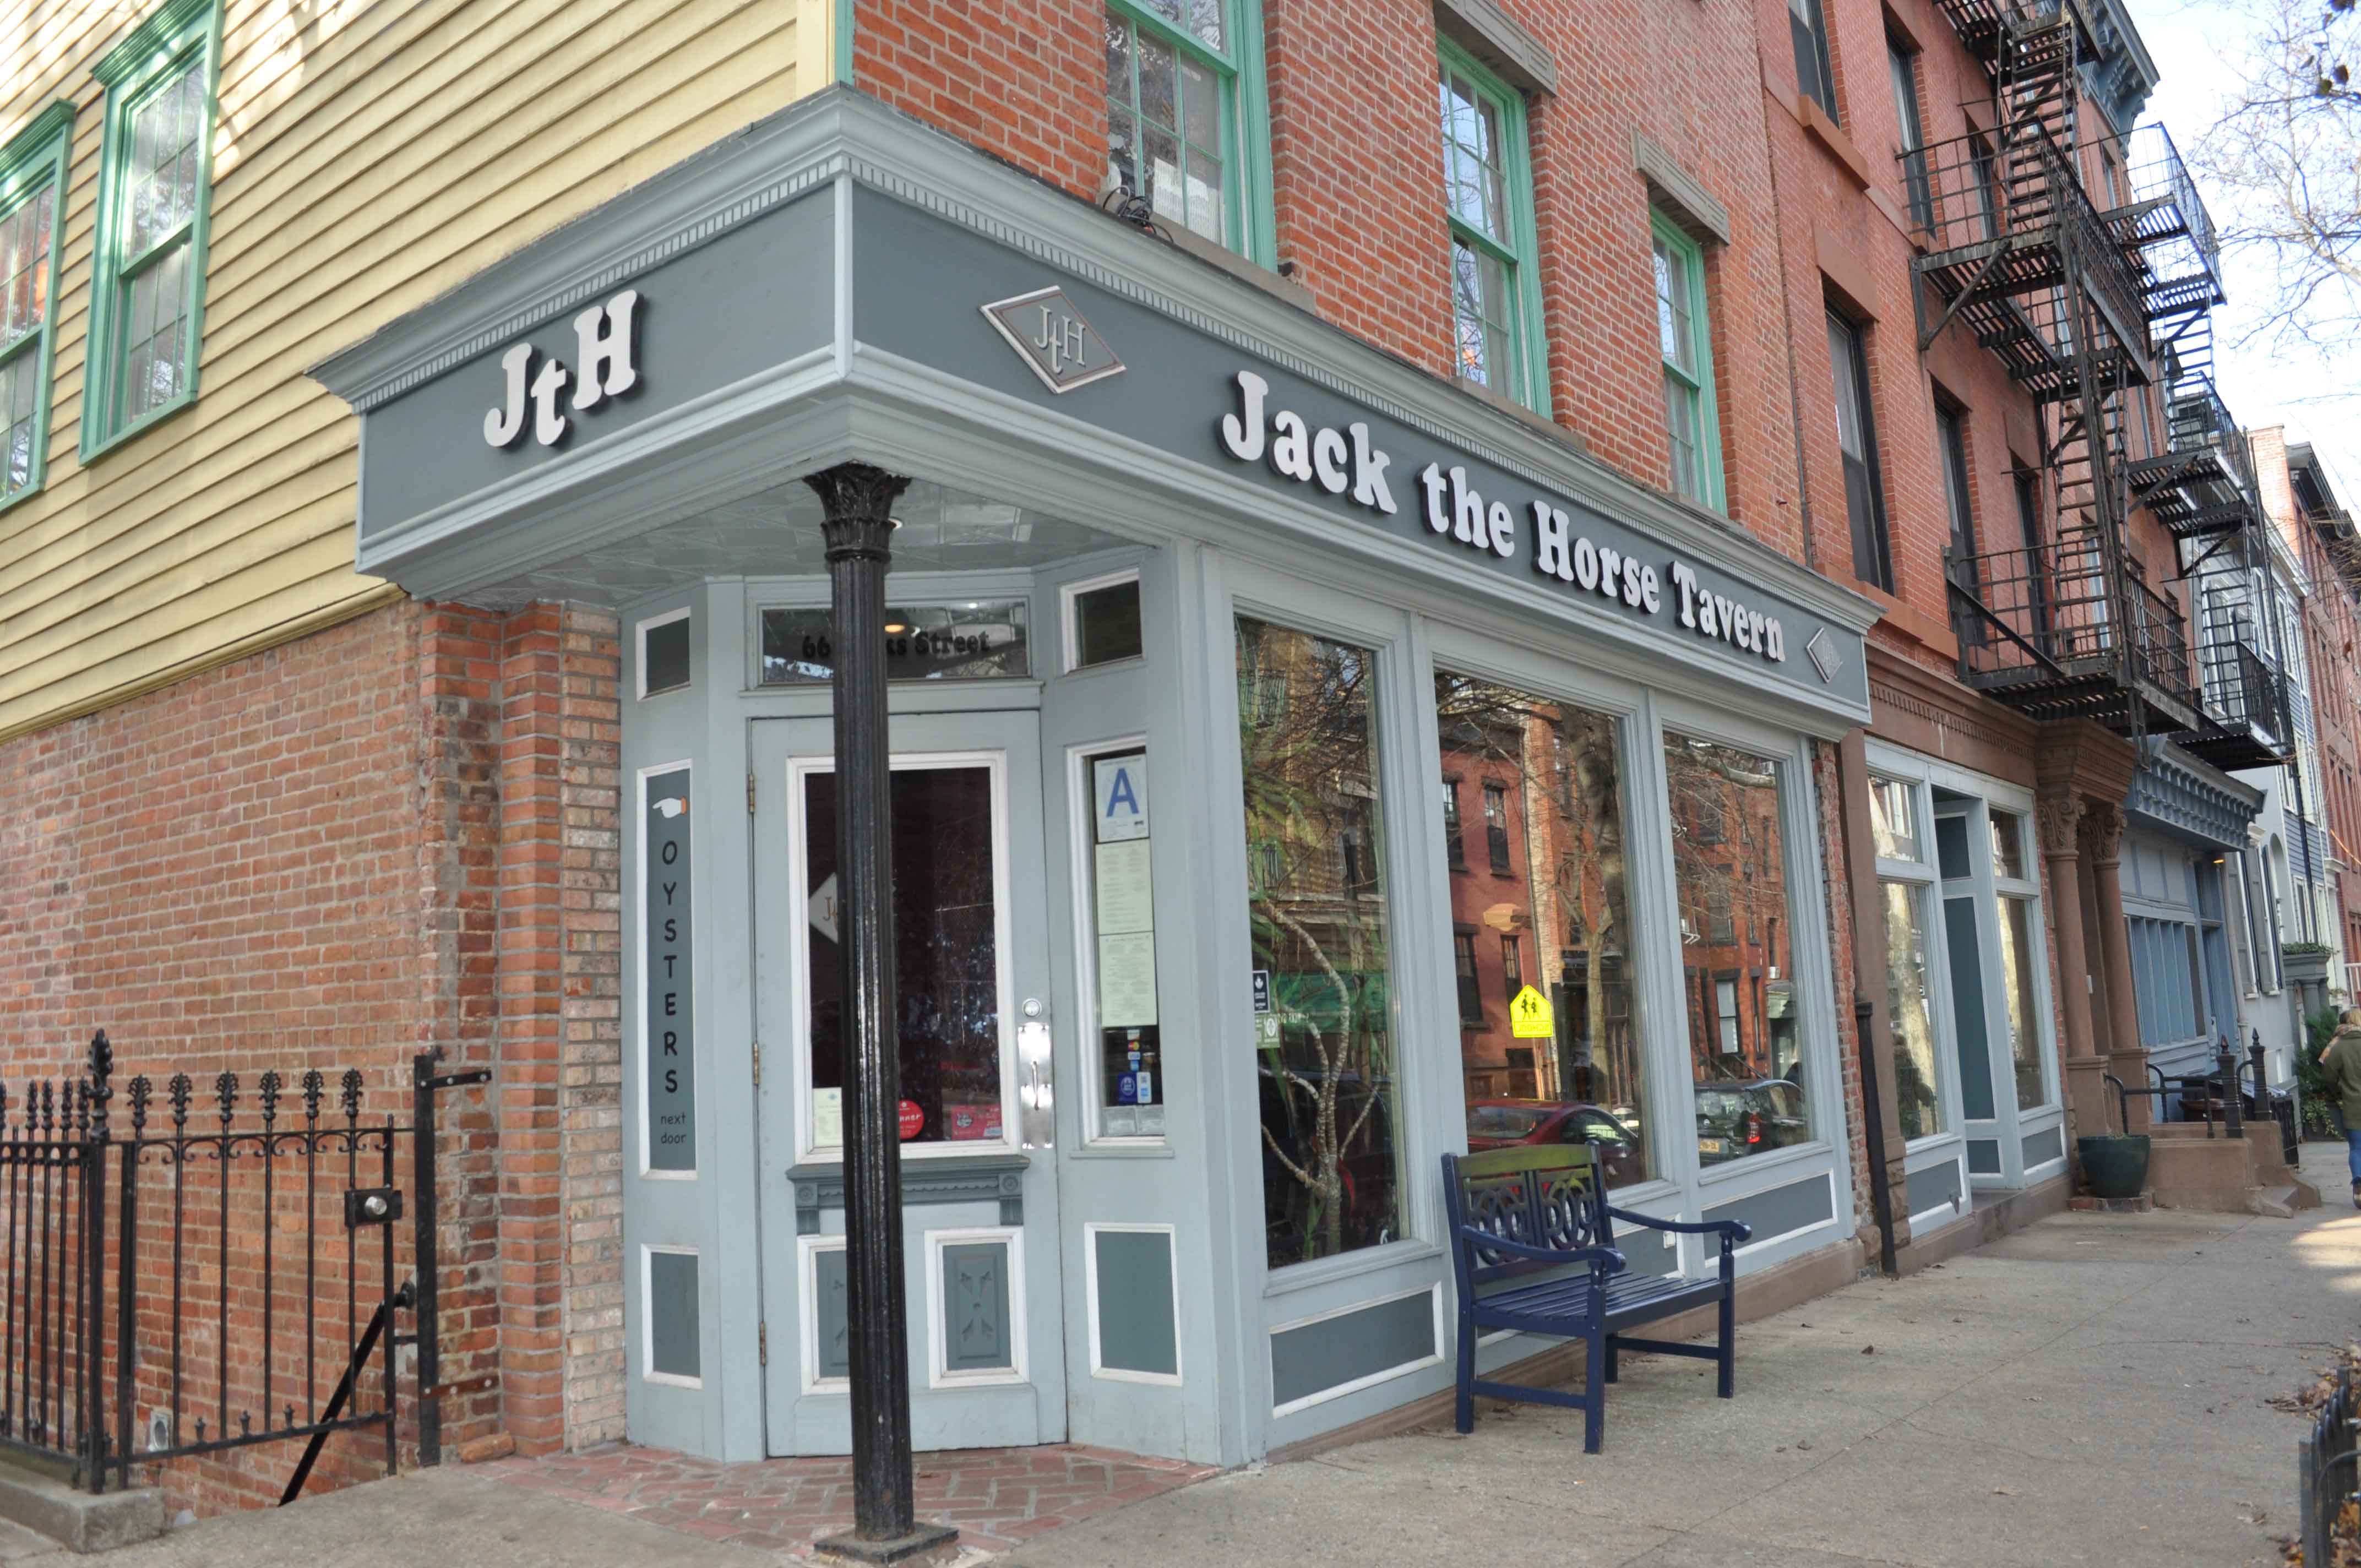 2 Pierrepont residents will love being so close to Jack the Horse Tavern, shown here, a Brooklyn restaurant favorite